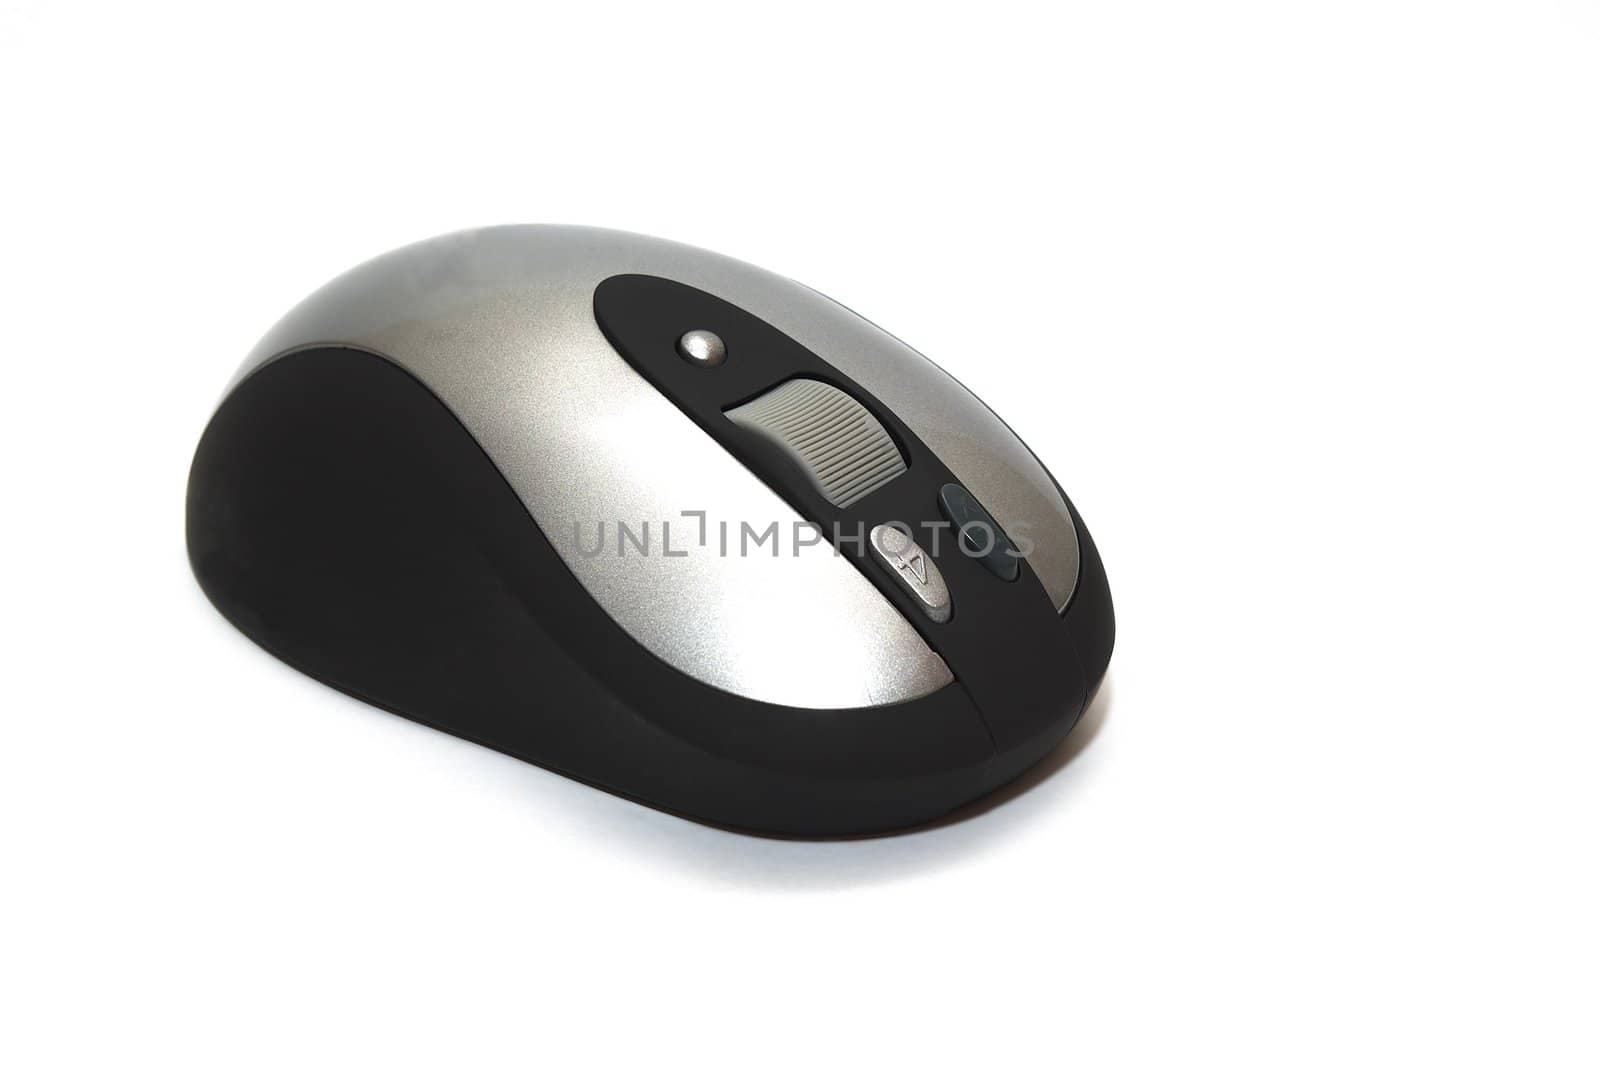 photo of the computer mouse on white background